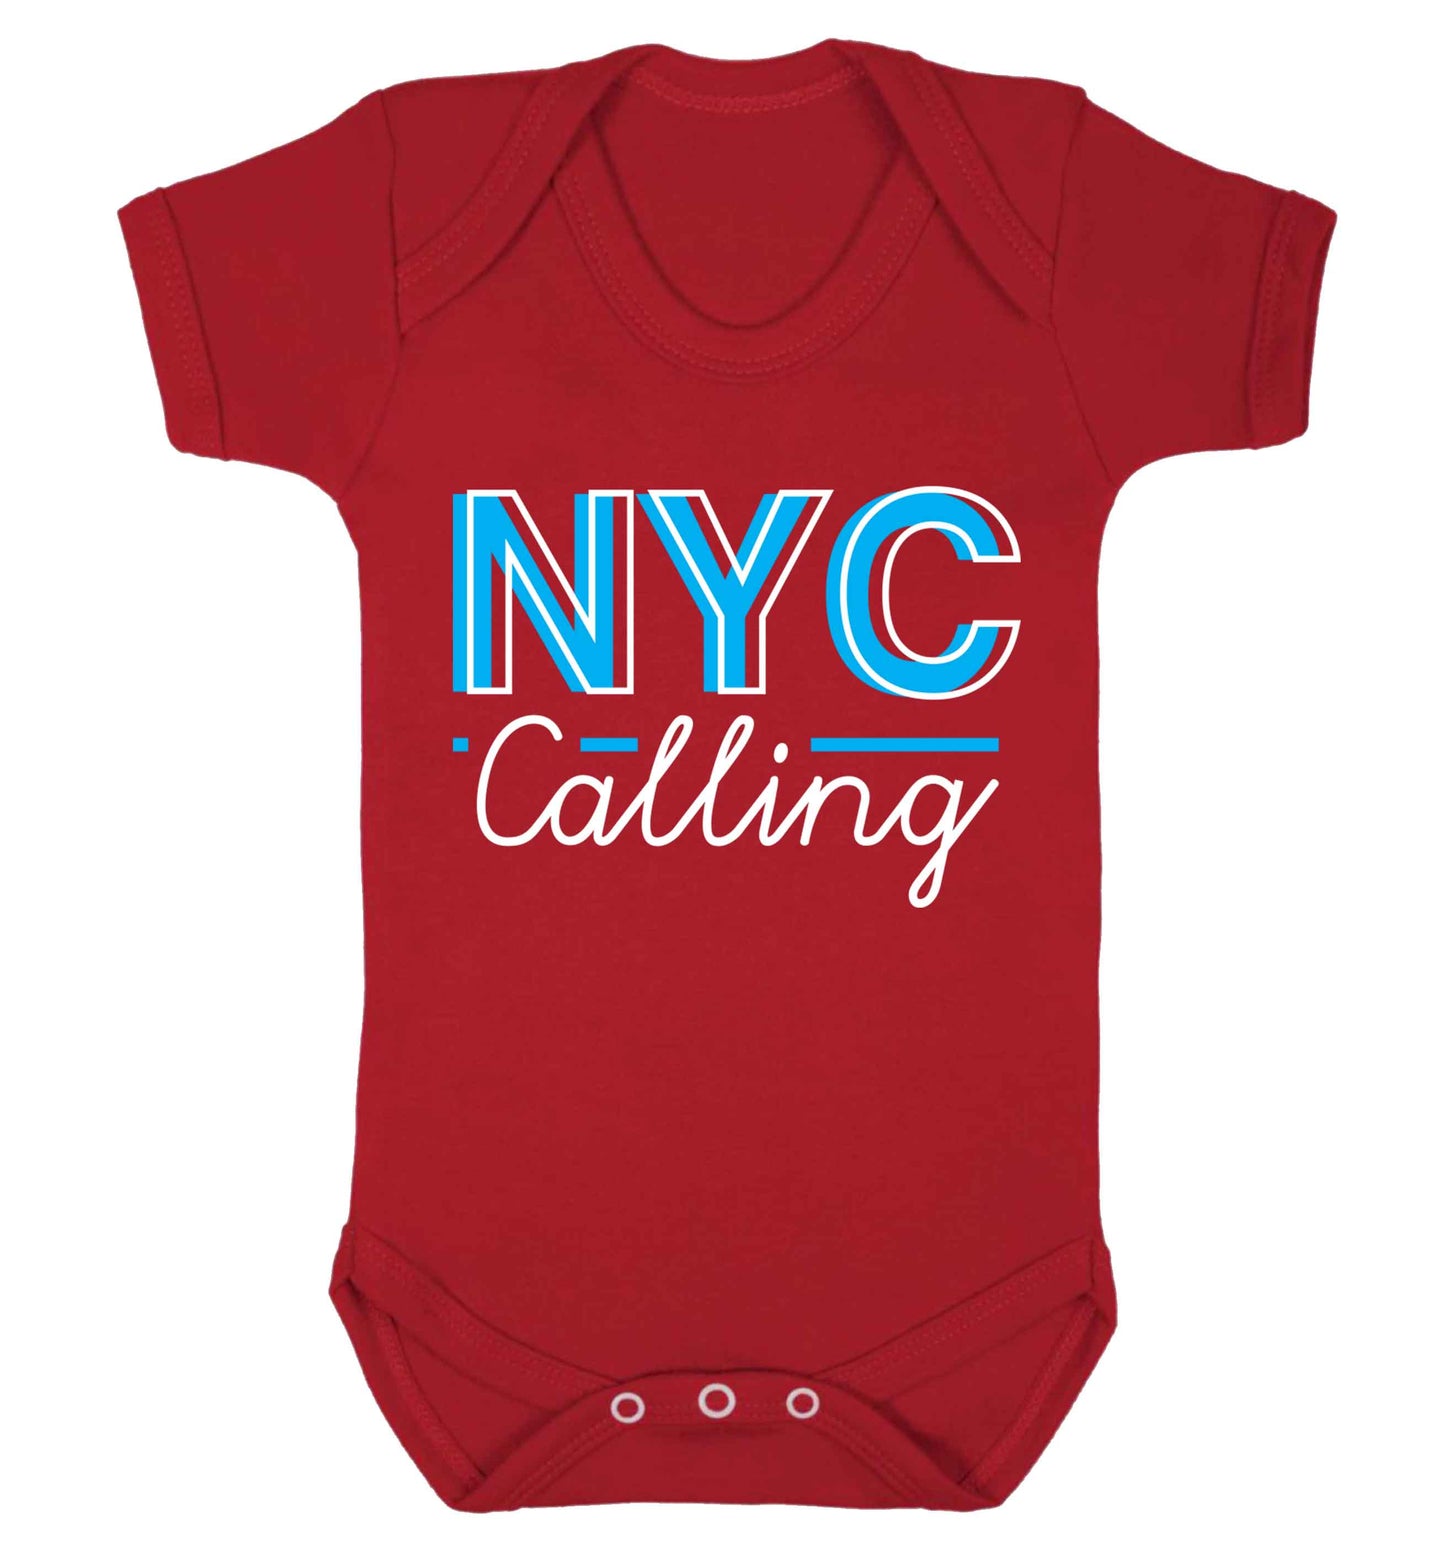 NYC calling Baby Vest red 18-24 months